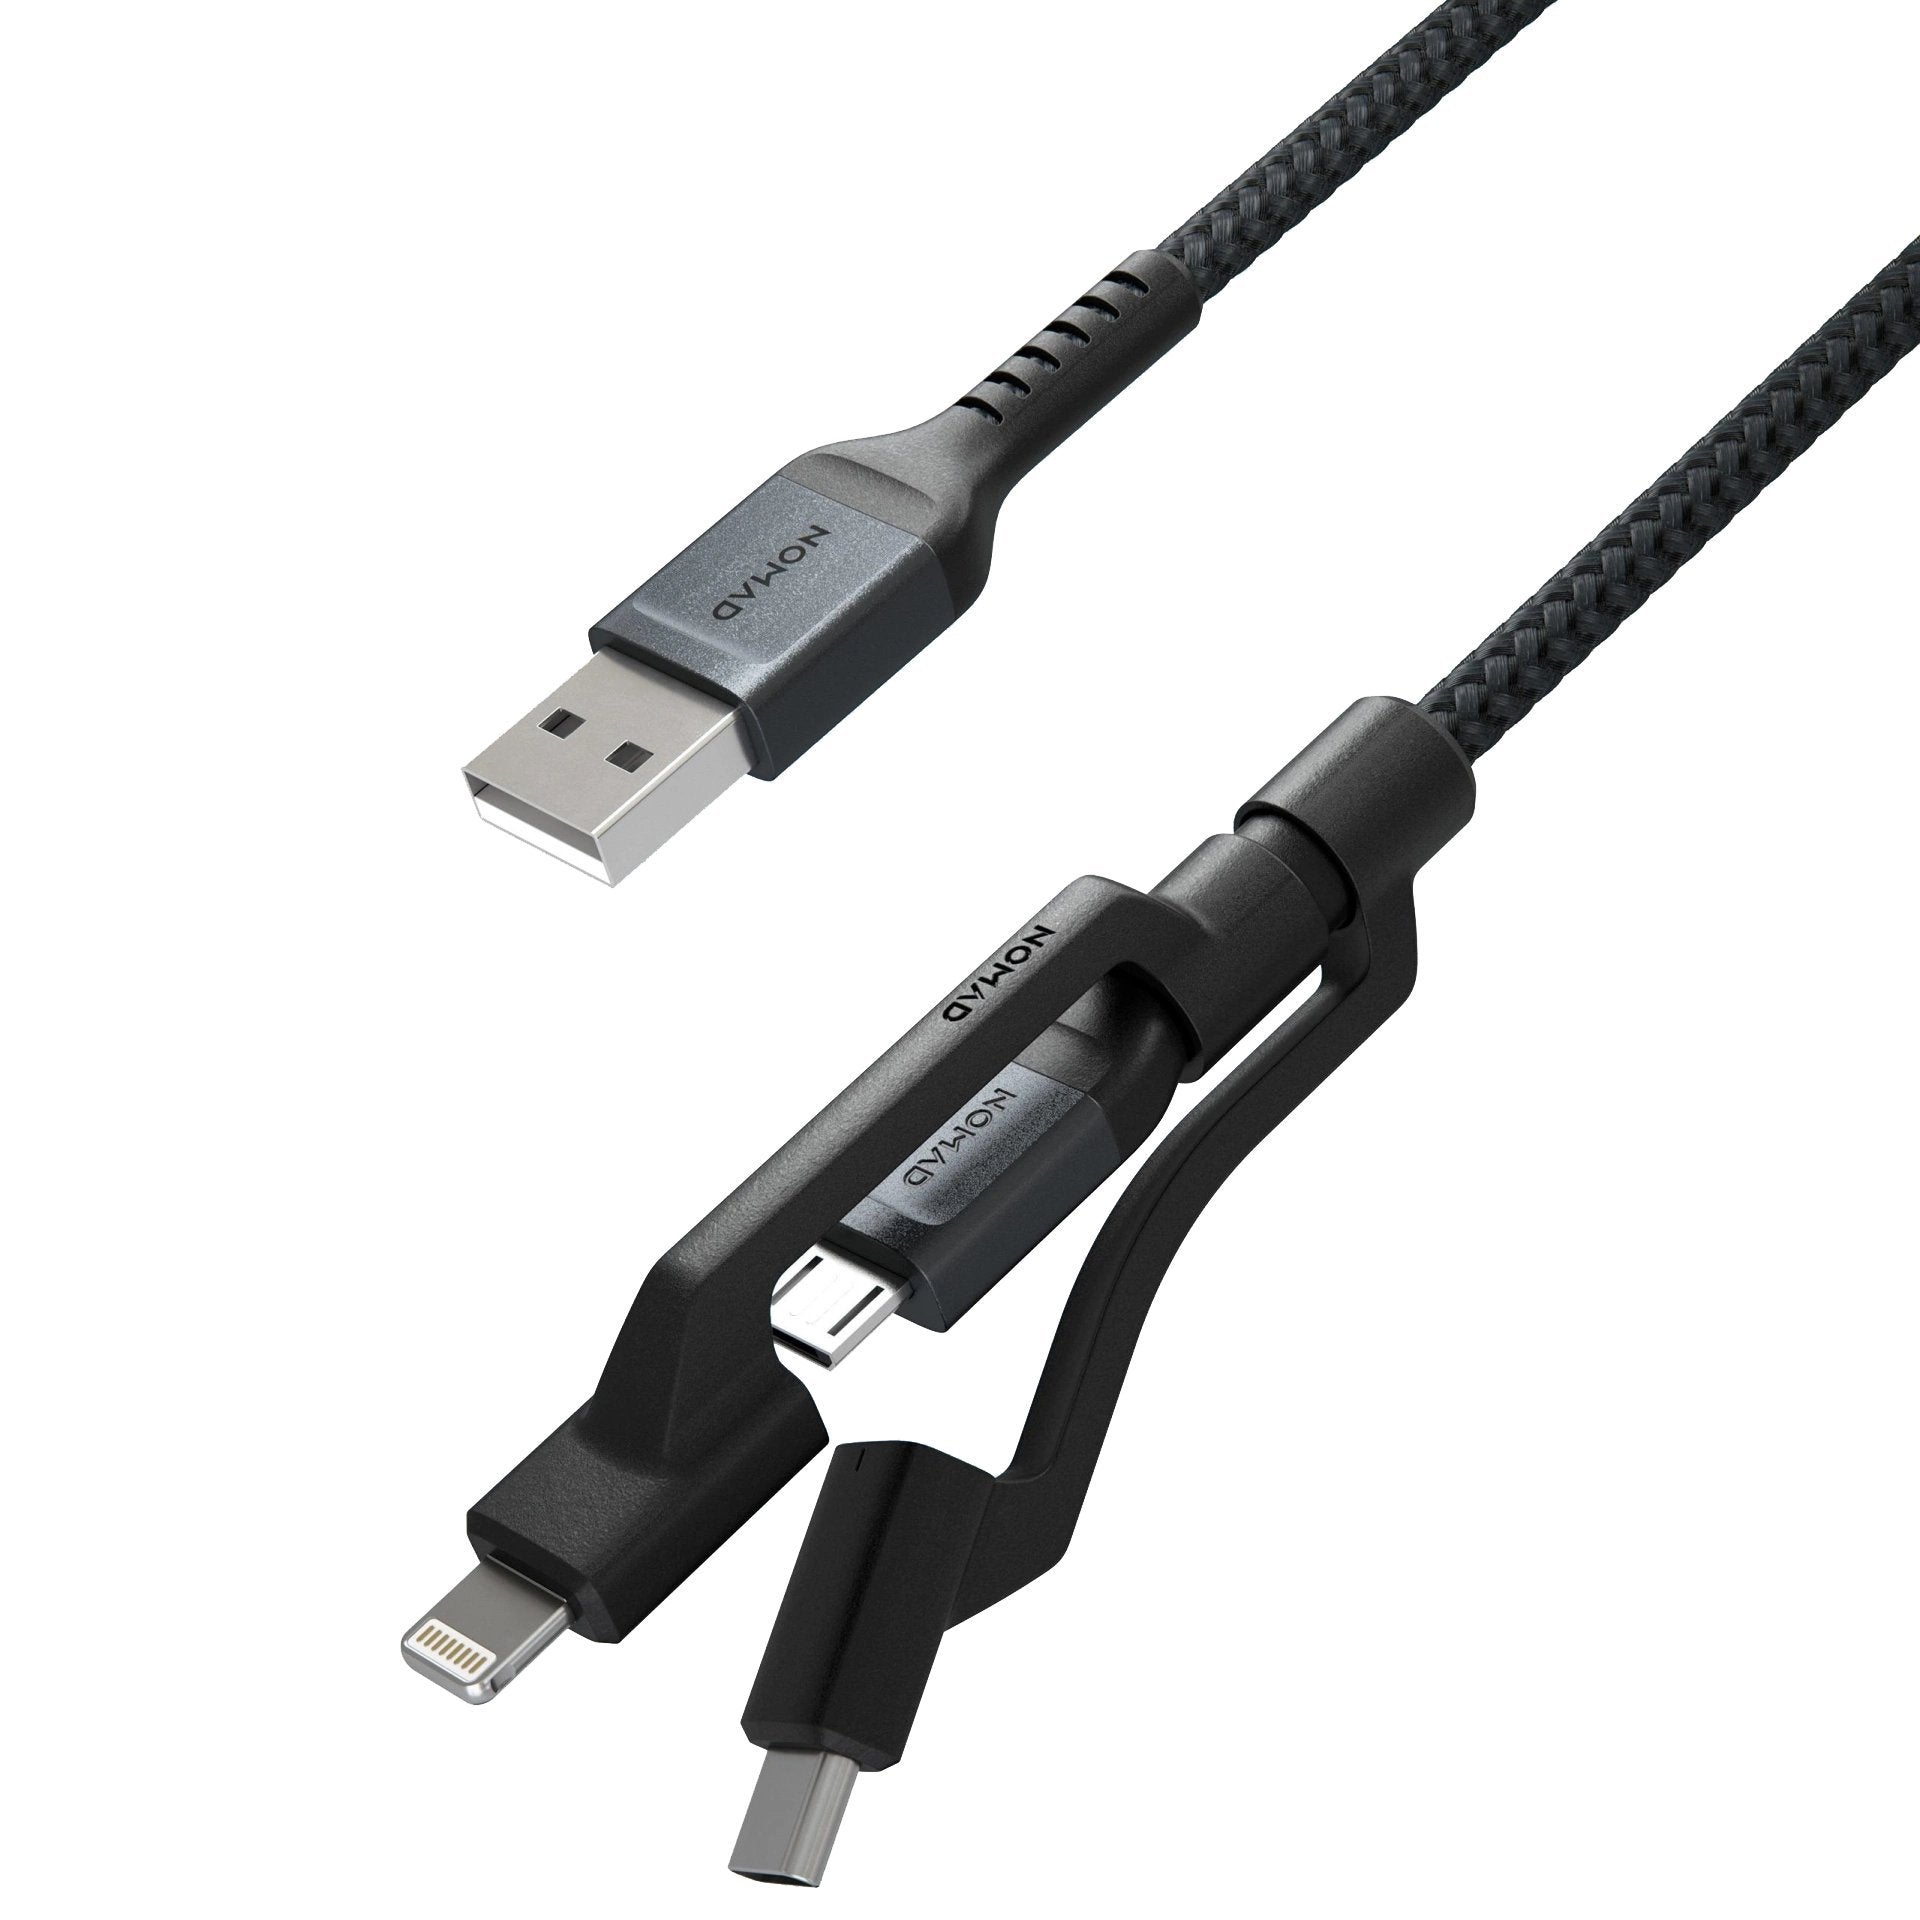 NOMAD Rugged 3-in-1 Cables 1.5M, Black Cable NOMAD 